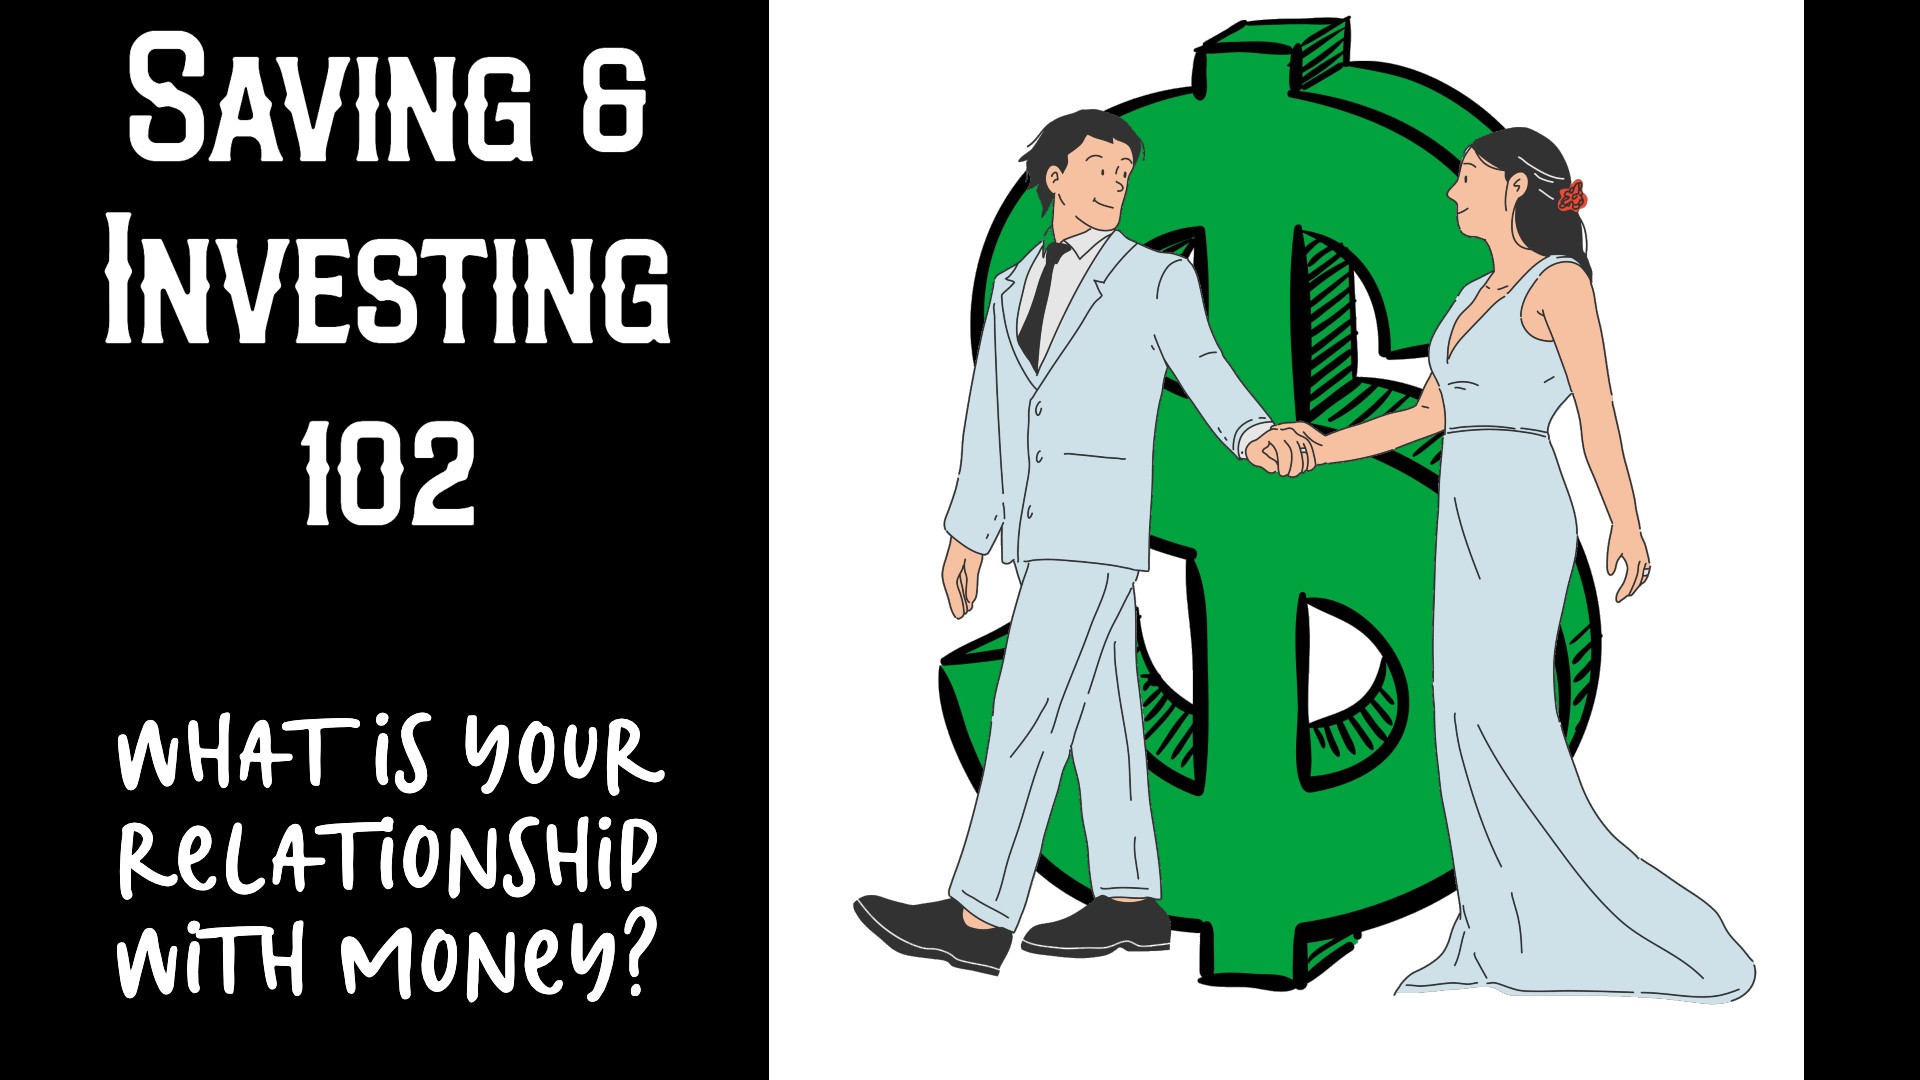 Saving & Investing 102: What is Your Relationship with Money?